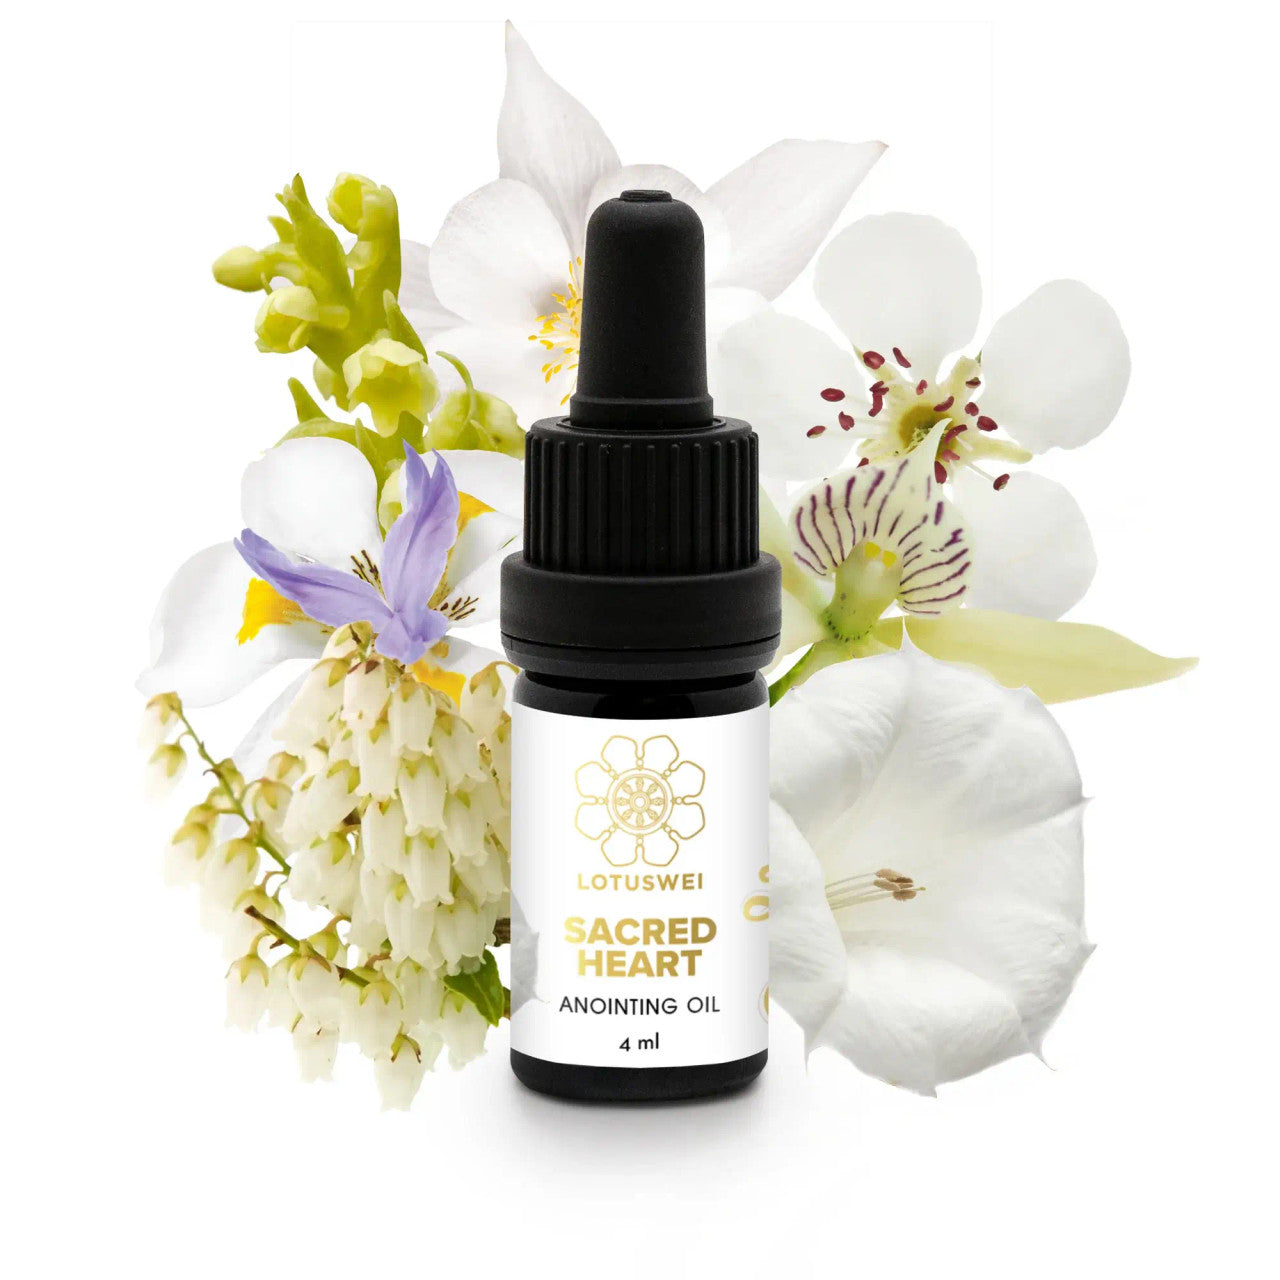 LOTUSWEI Sacred Heart Anointing Oil ~ For Hope, Resilience, Transmutation